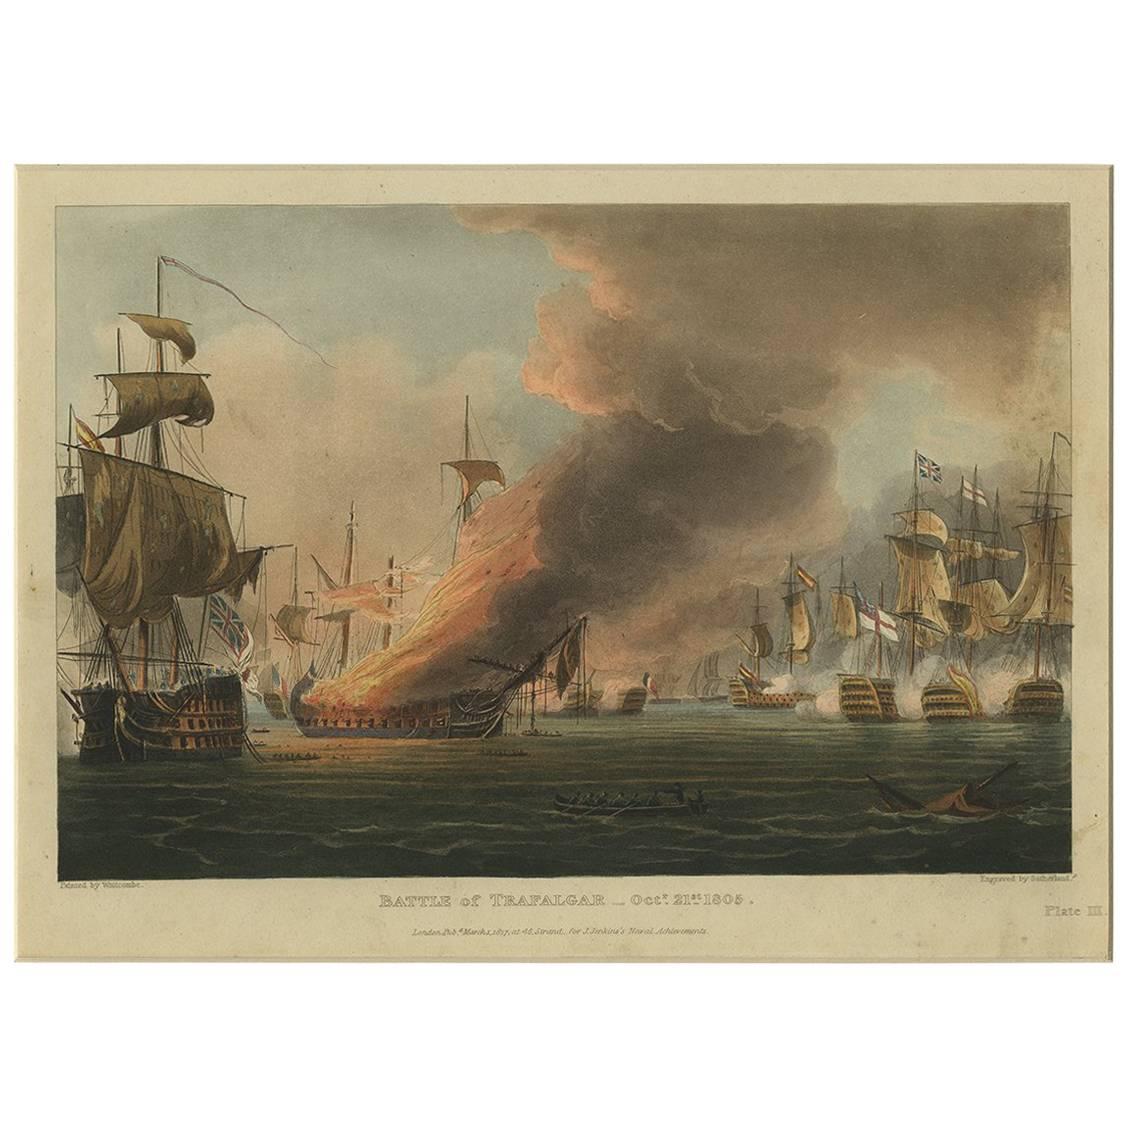 Antique Print of the Battle of Trafalgar 'Pl. III' by T. Sutherland, 1816